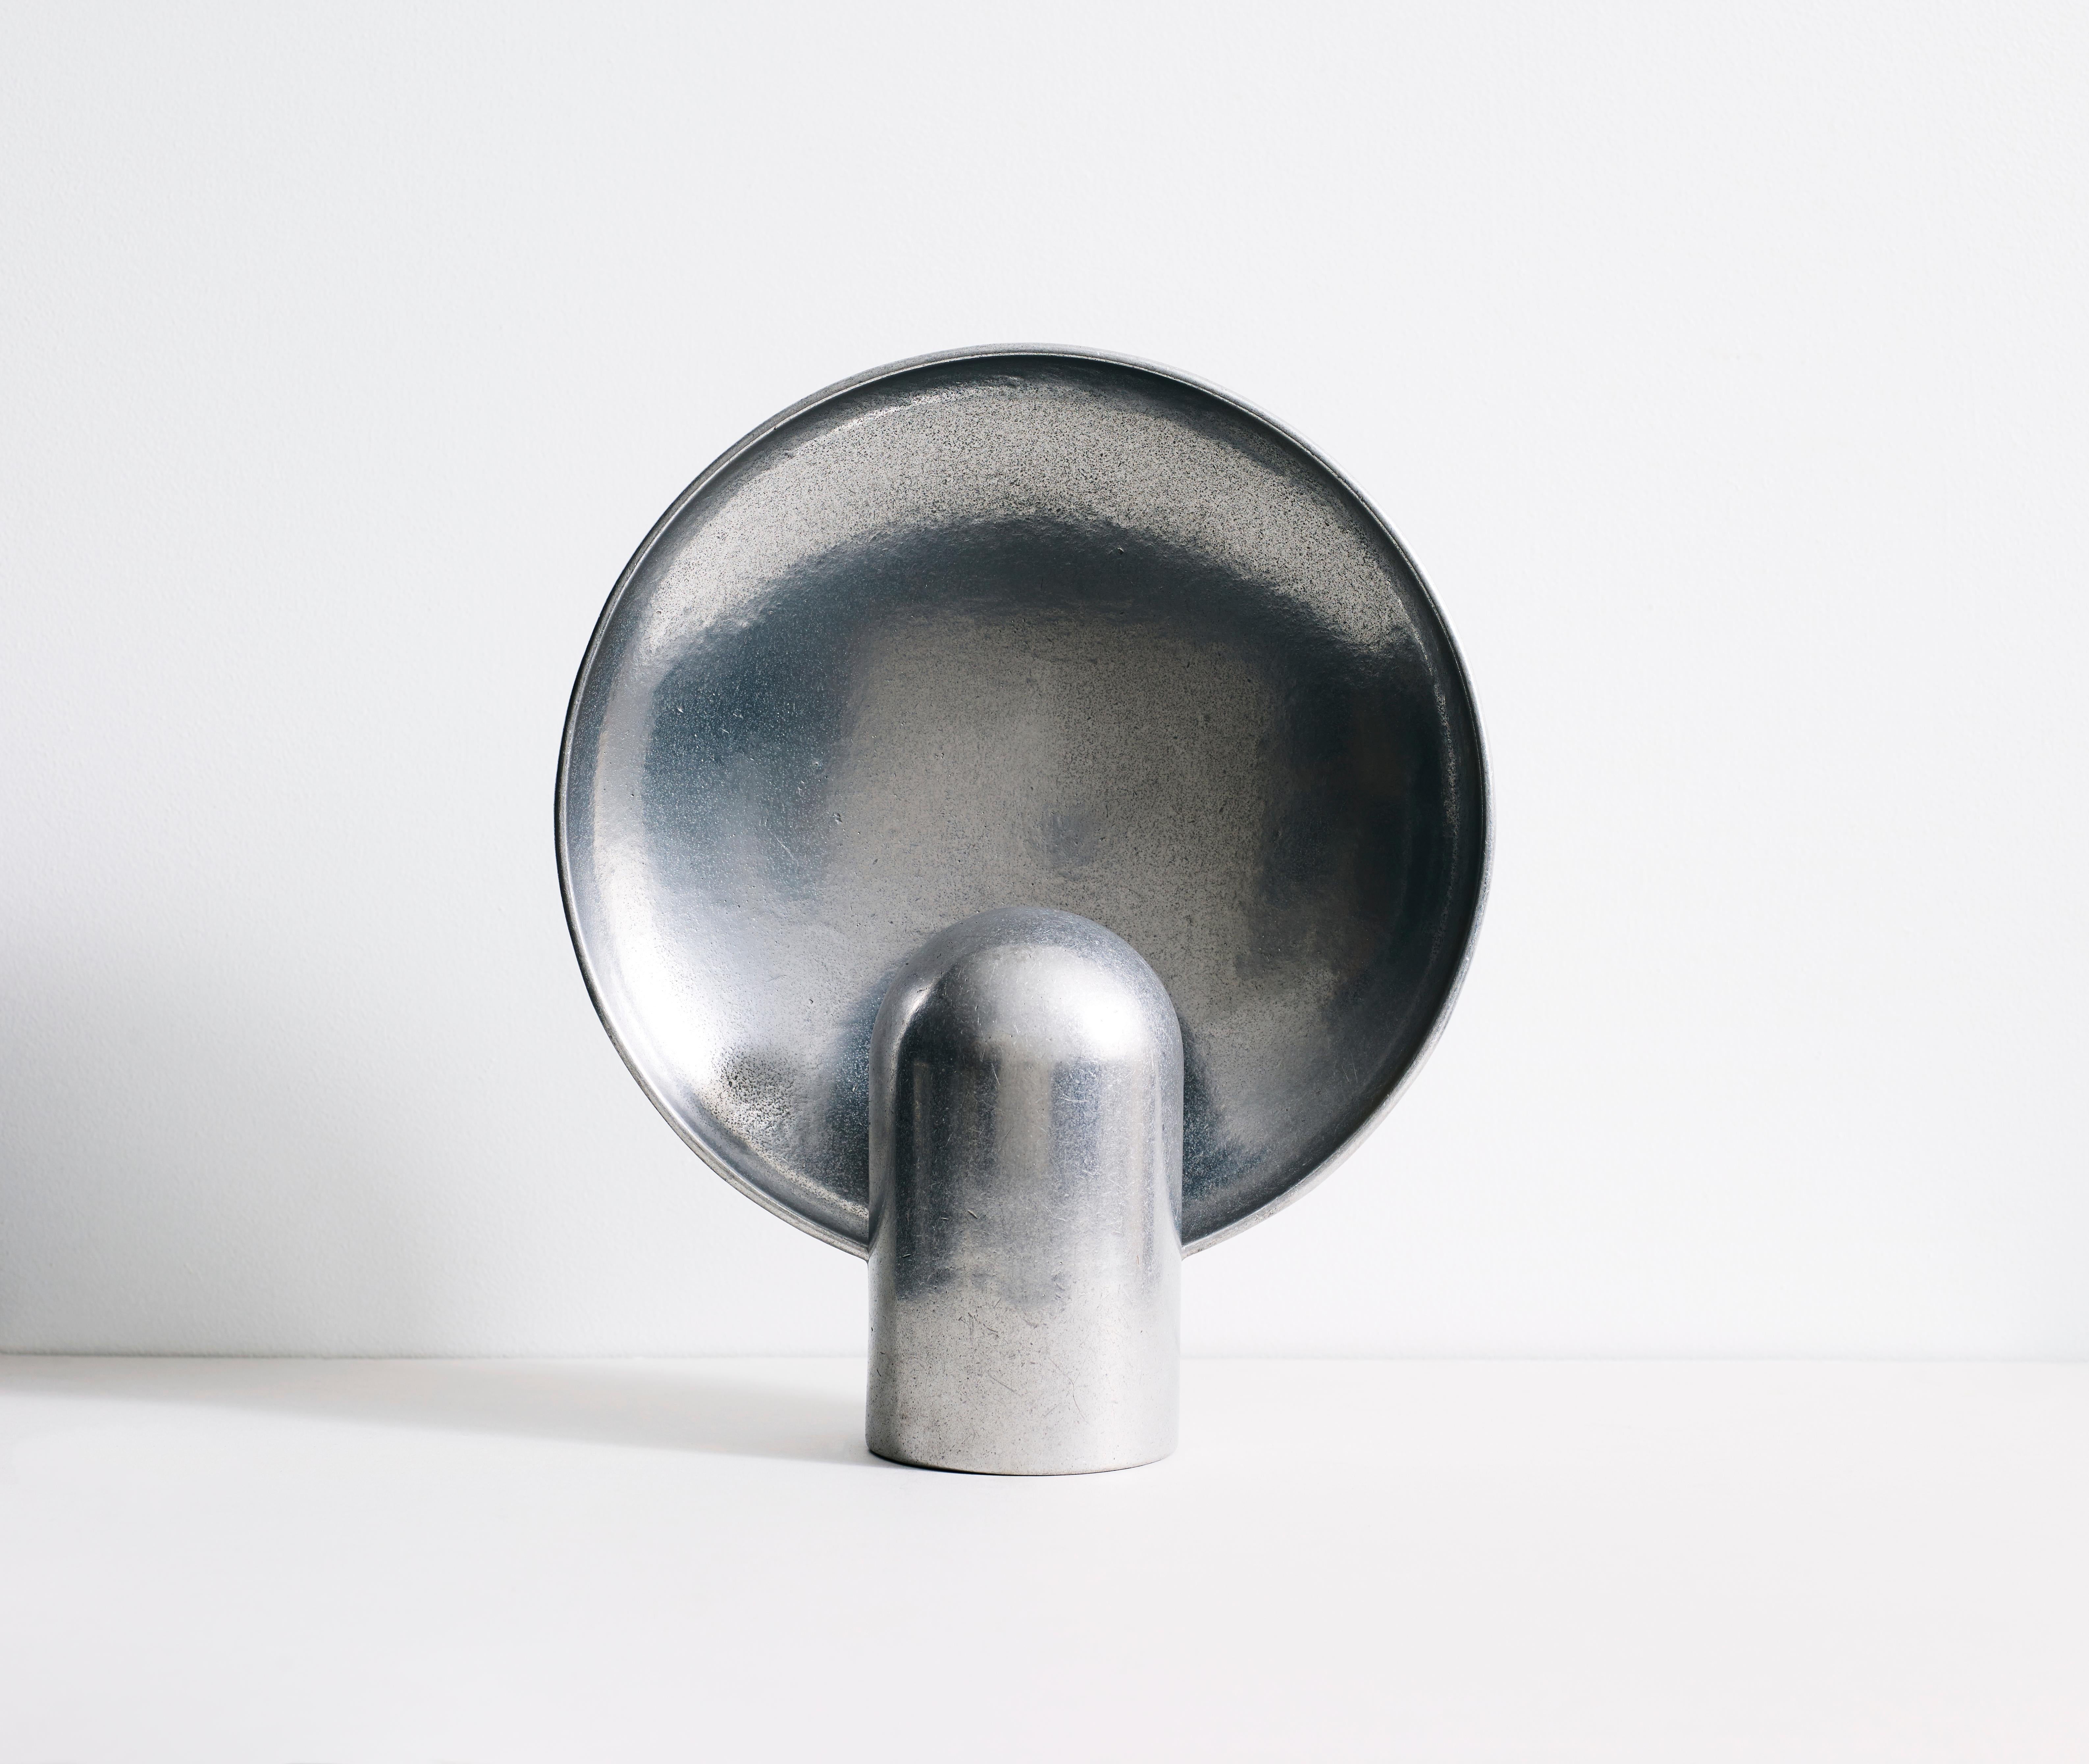 Sculpted lamp by Henry Wilson
Material: Aluminium, also available in different stones and bronze.

The surface sconce is an ambient, sculptural light cast in two halves from solid gunmetal. The casting is rumble finished for a smooth texture.

Each